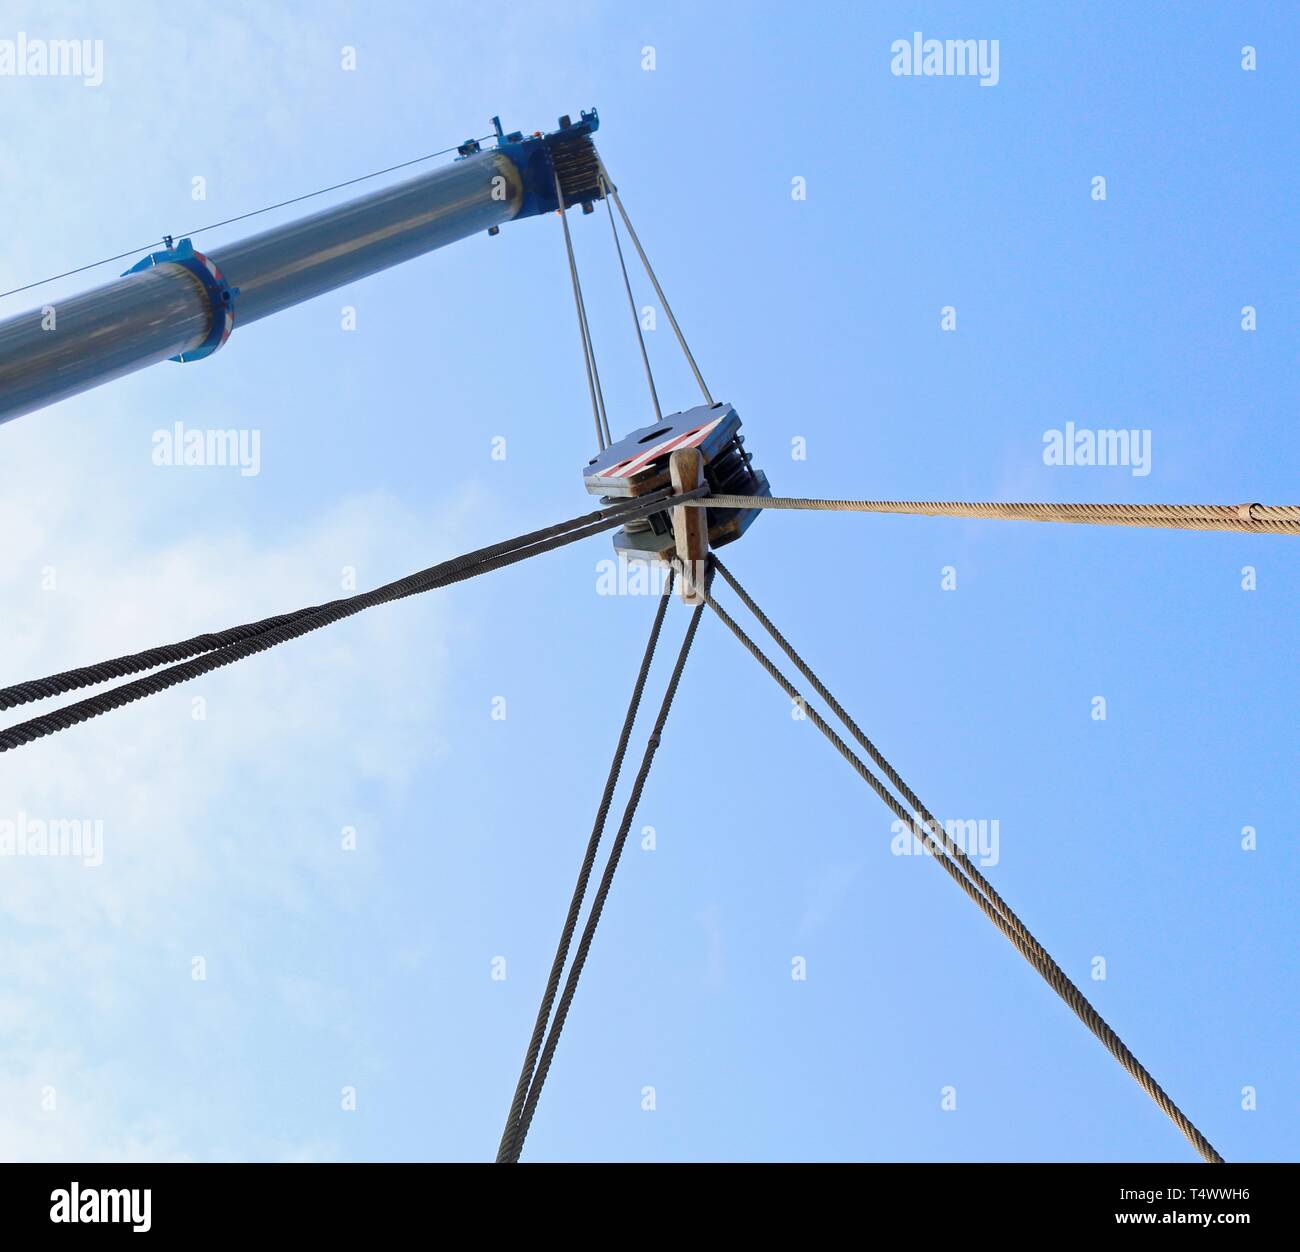 hydraulic arm of a powerful crane for lifting heavy loads at an industrial site Stock Photo